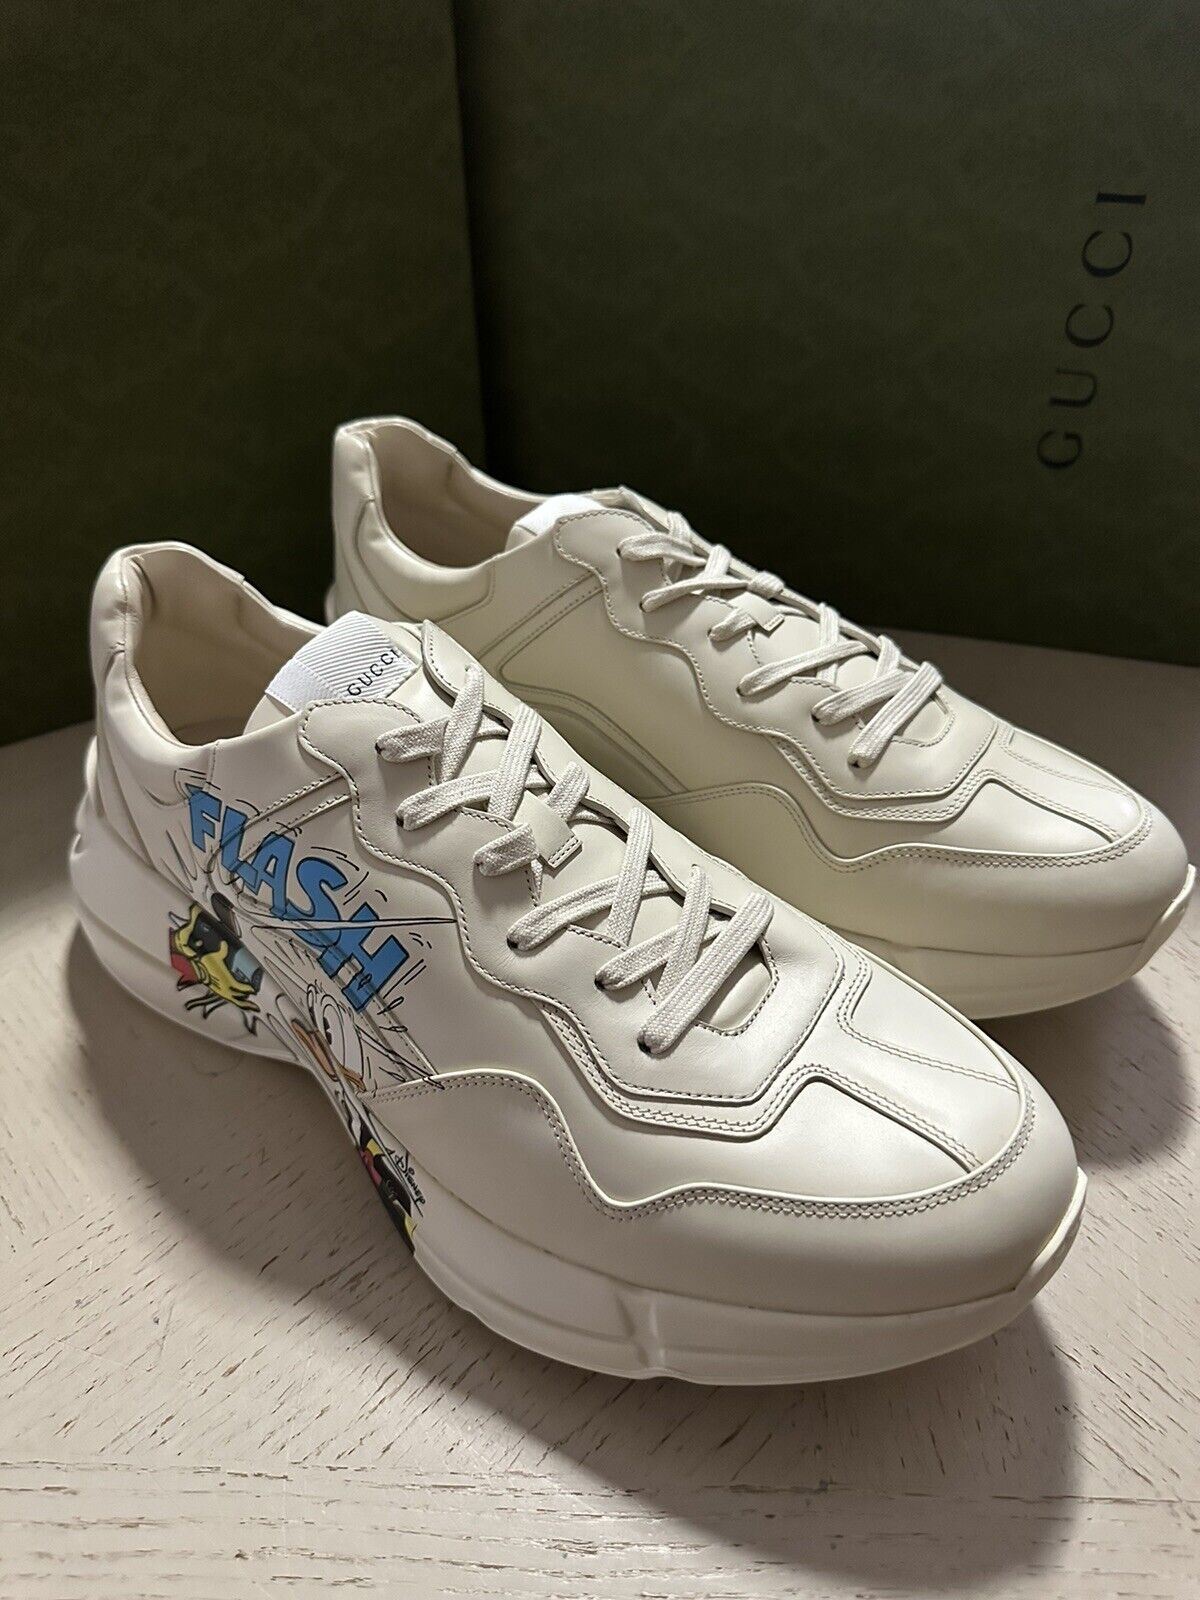 New $1980 Gucci Men Leather Disney Gucci Sneakers Shoes Ivory 15 US/14 UK 656509